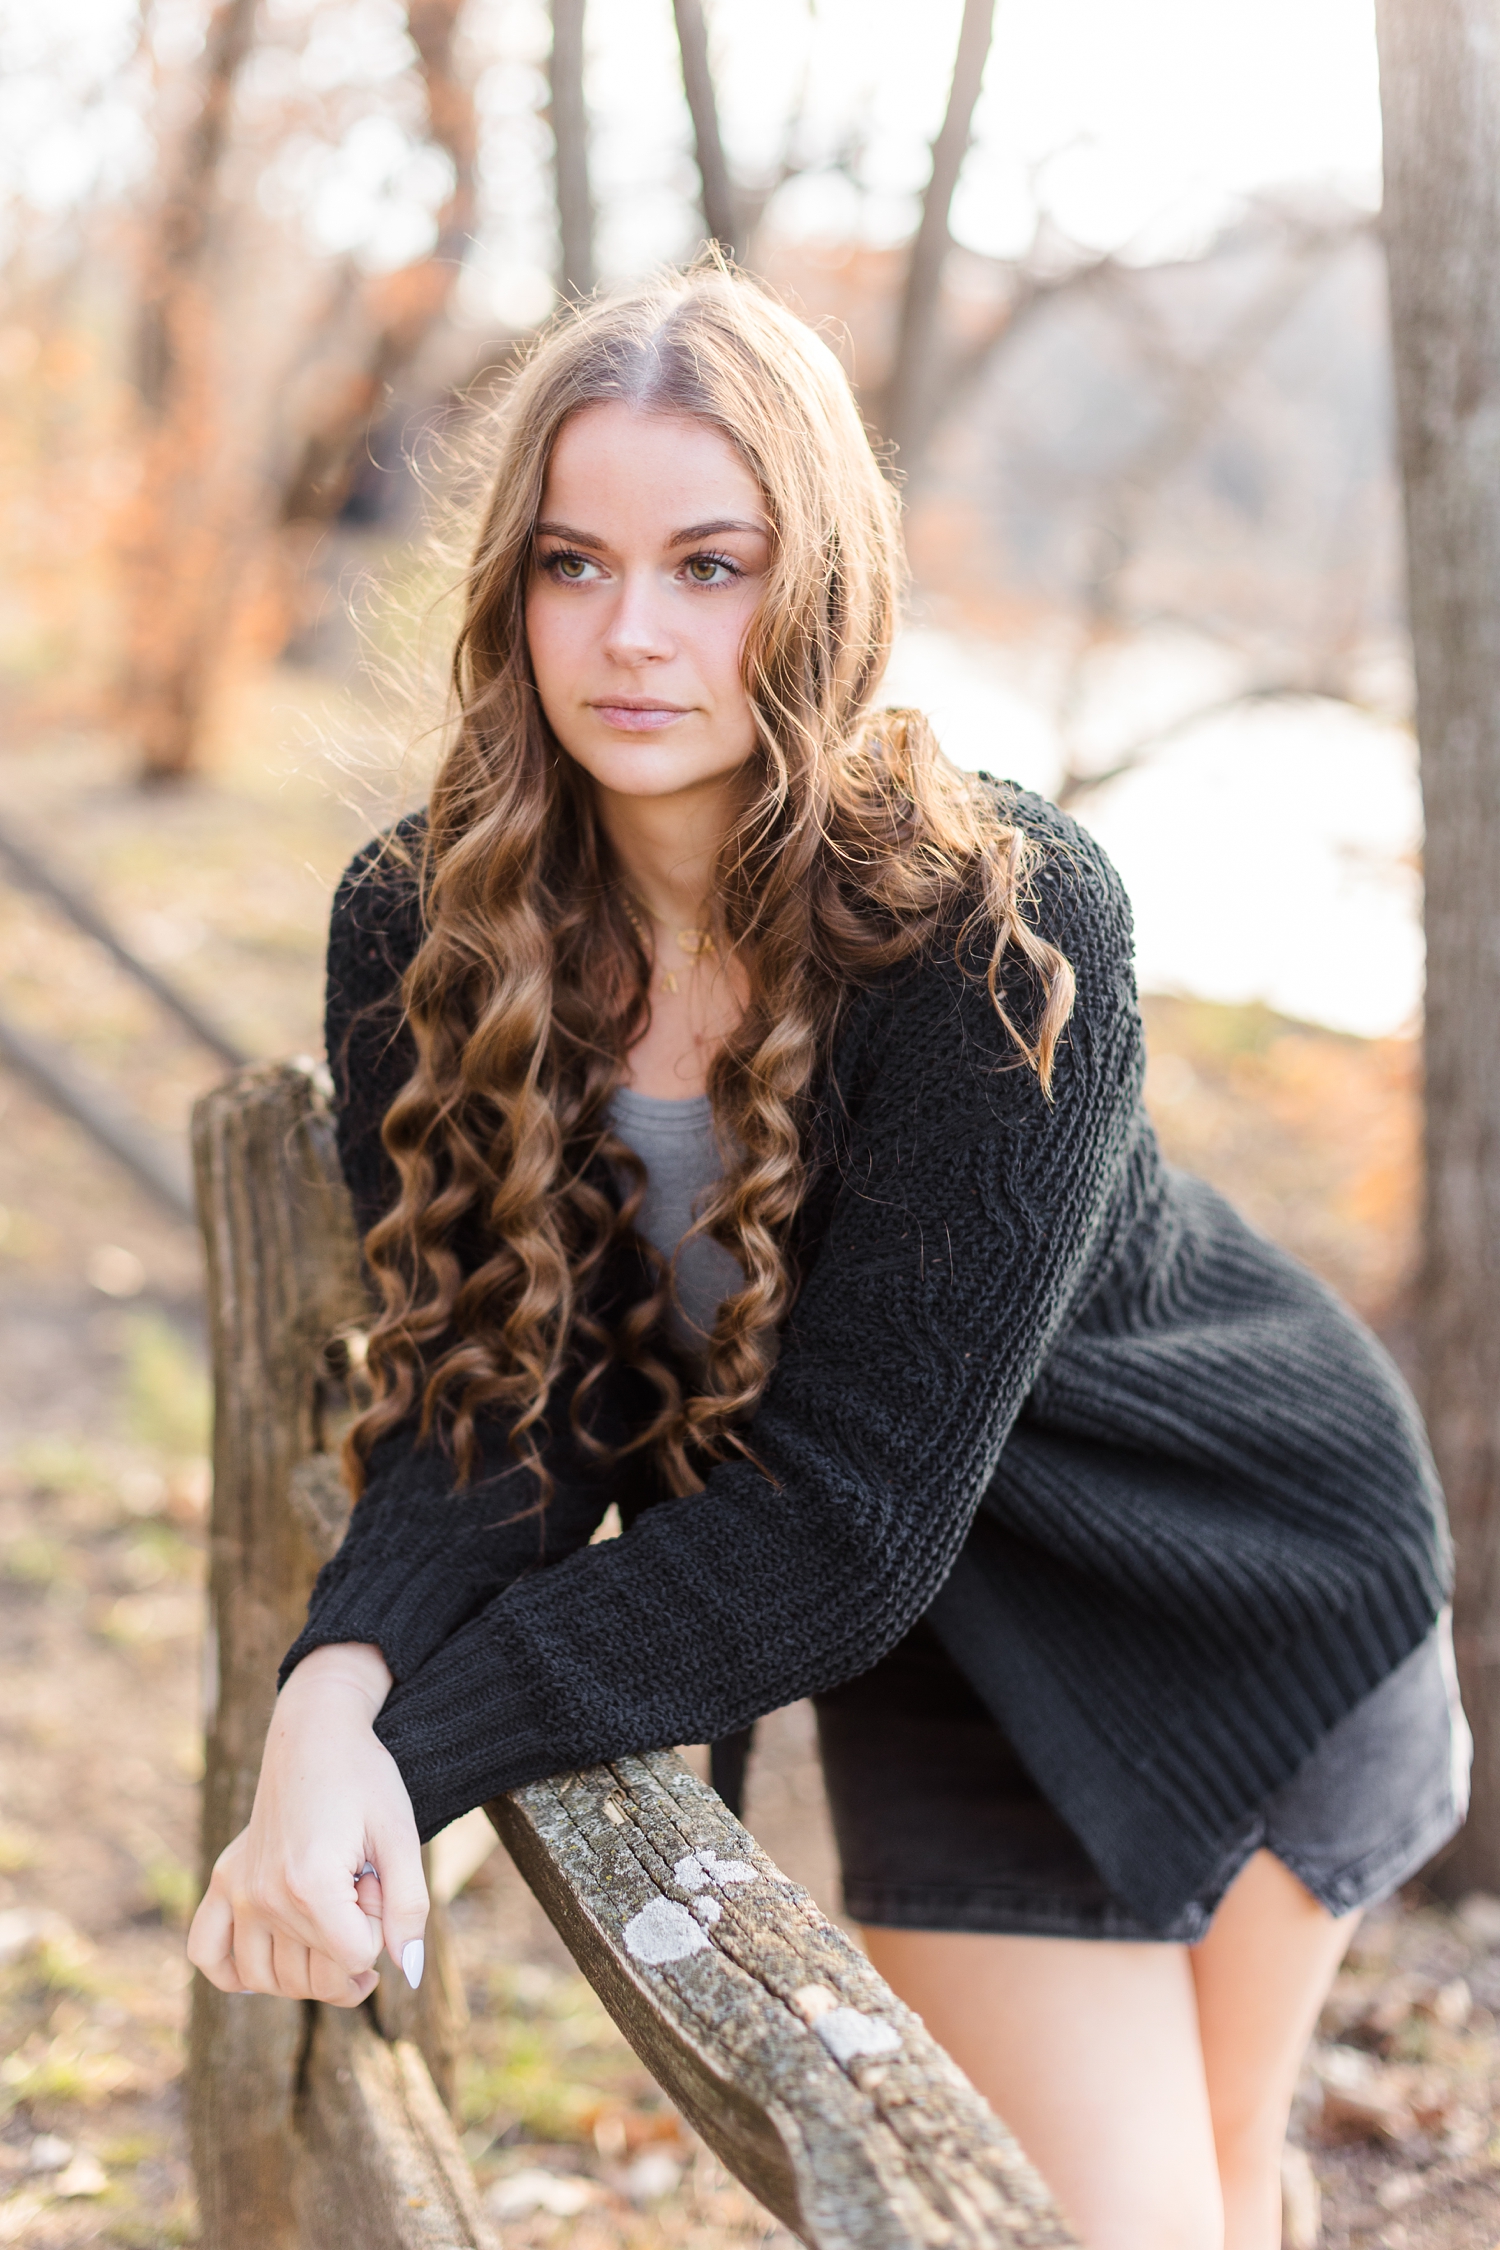 Avery leans on a wooden rail at Cottonwood Trail in Humboldt, IA | CB Studio